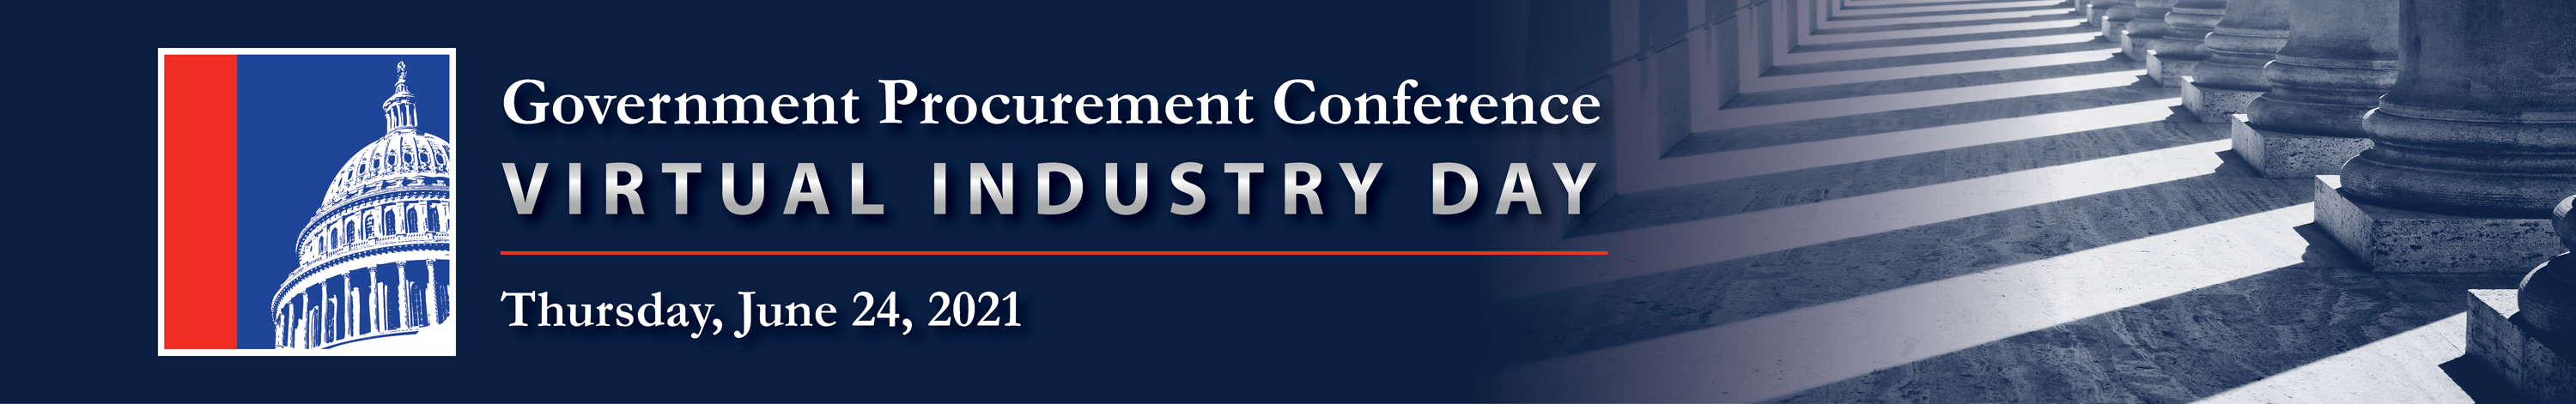 Government Procurement Conference (GPC) Virtual Industry Day